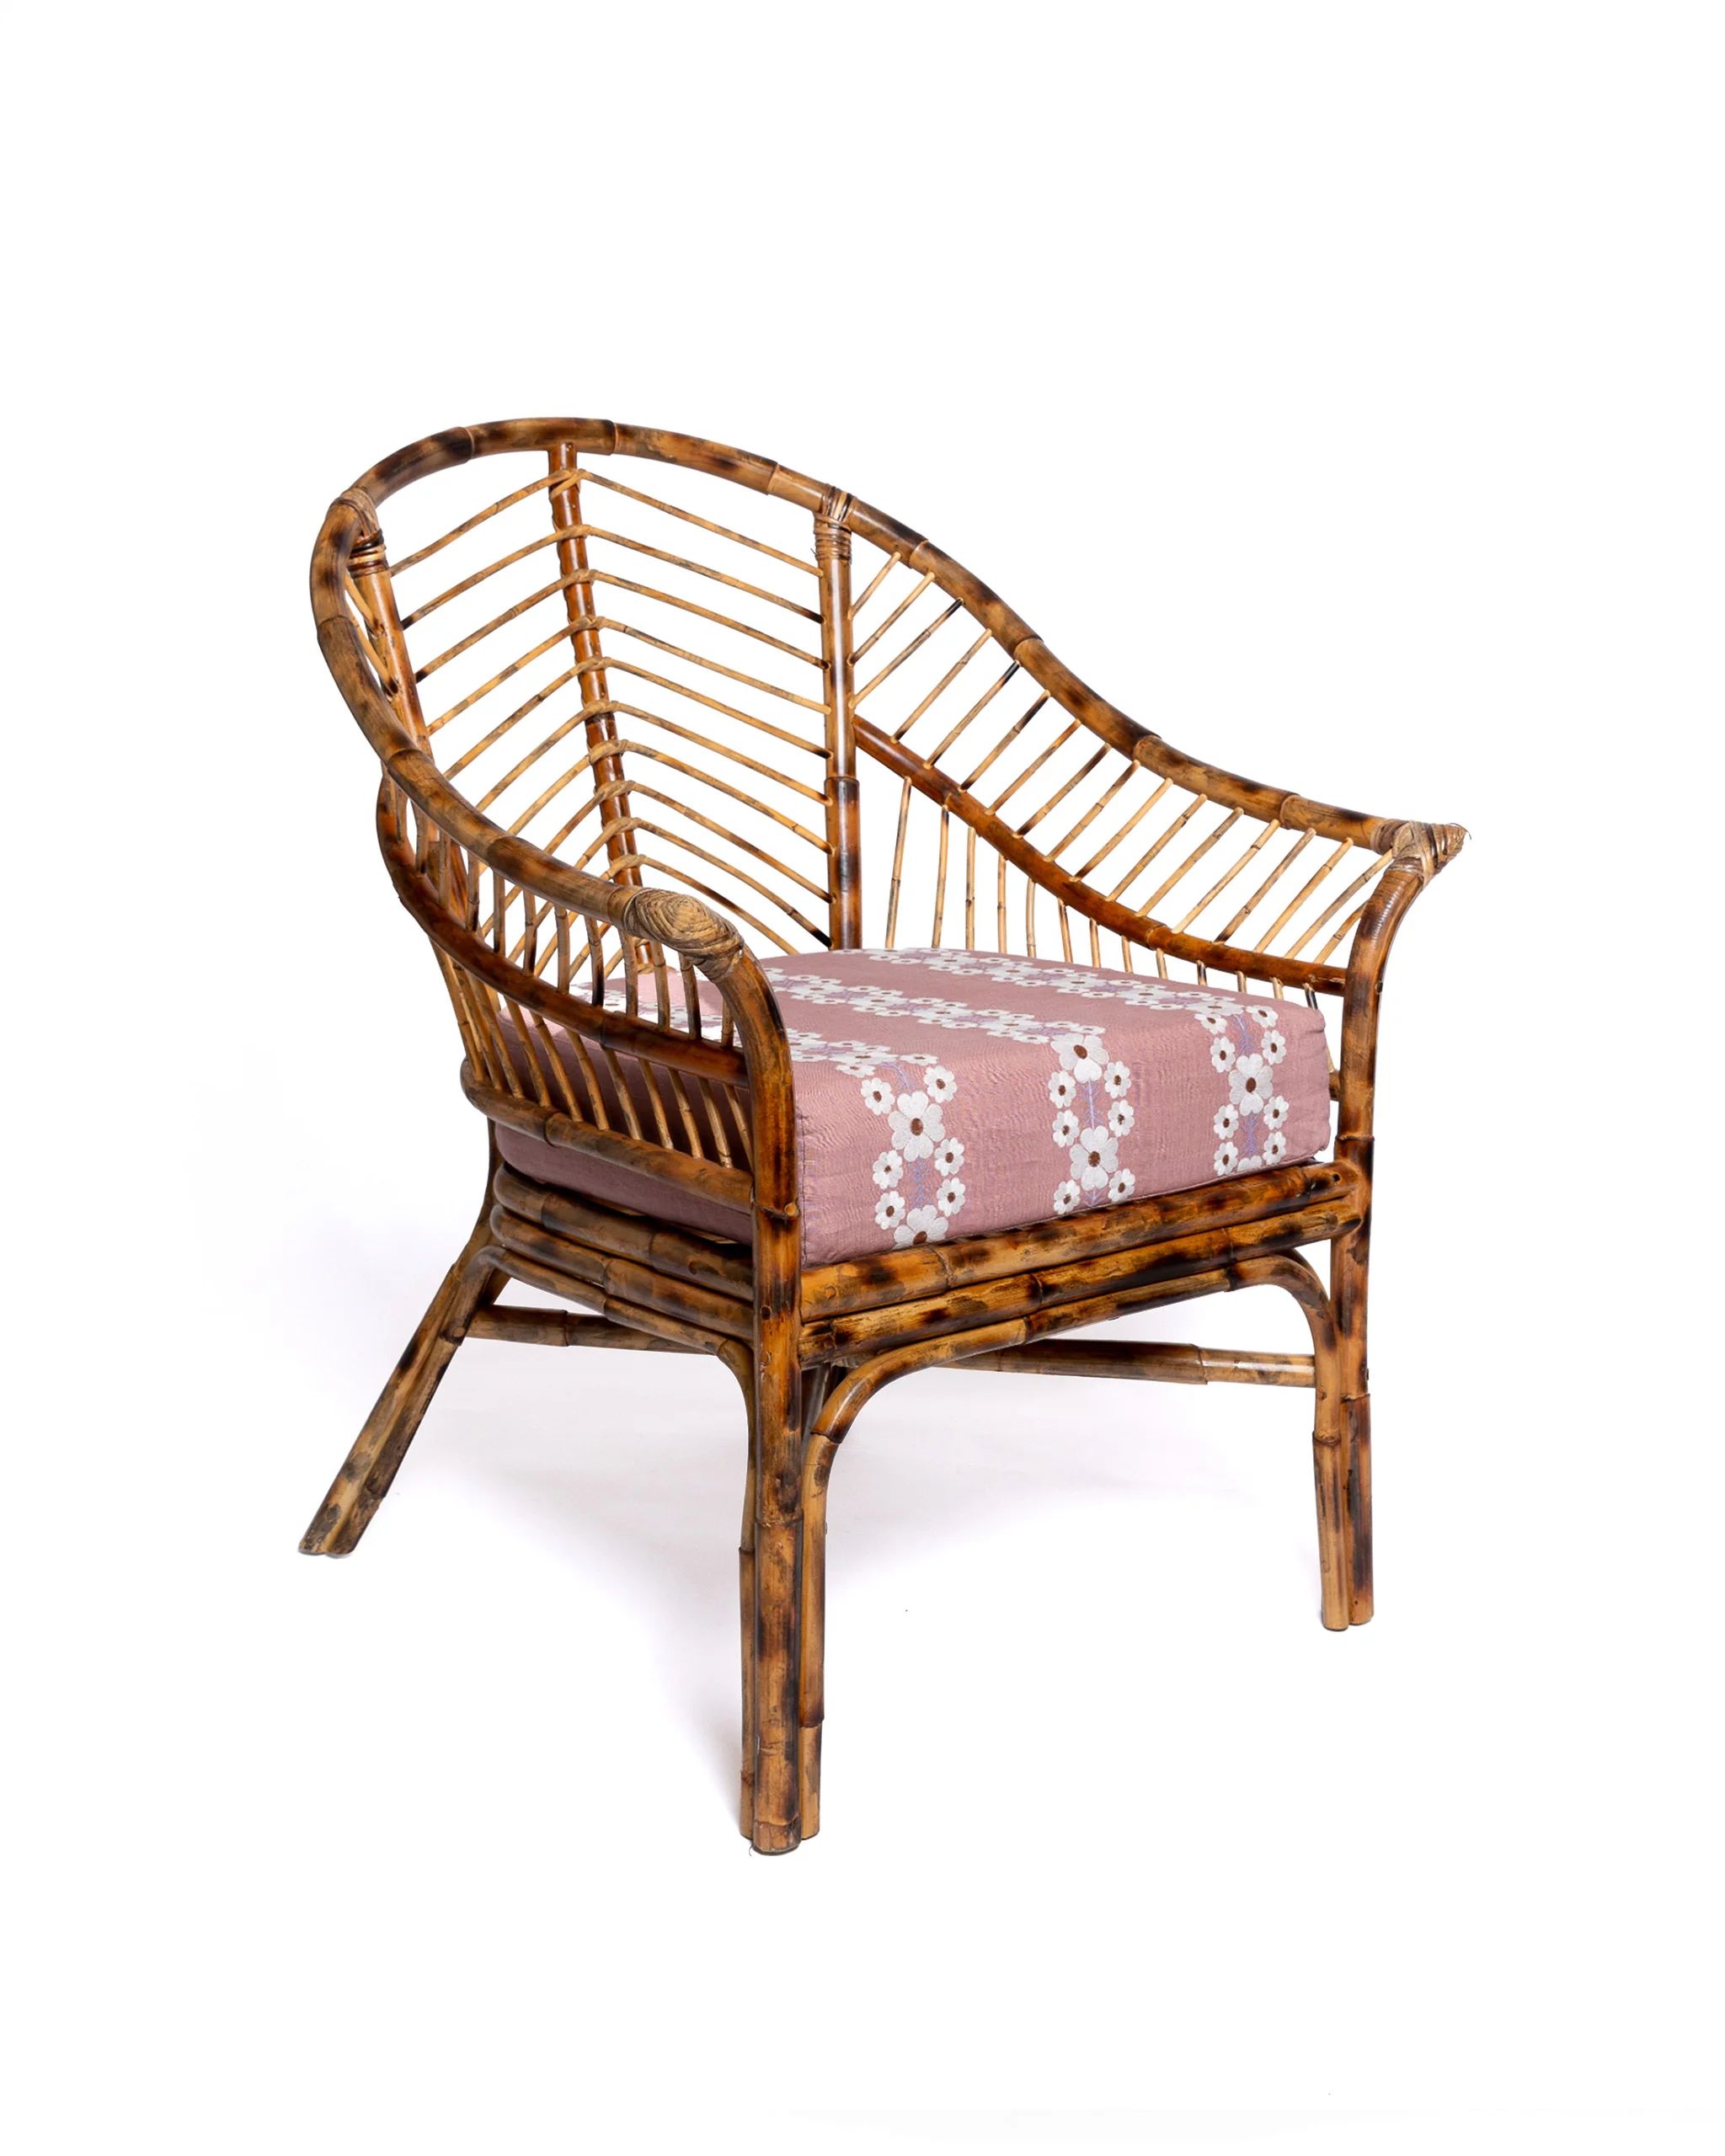 Piolo Bamboo chair | Sharland England by Louise Roe | Sharland England